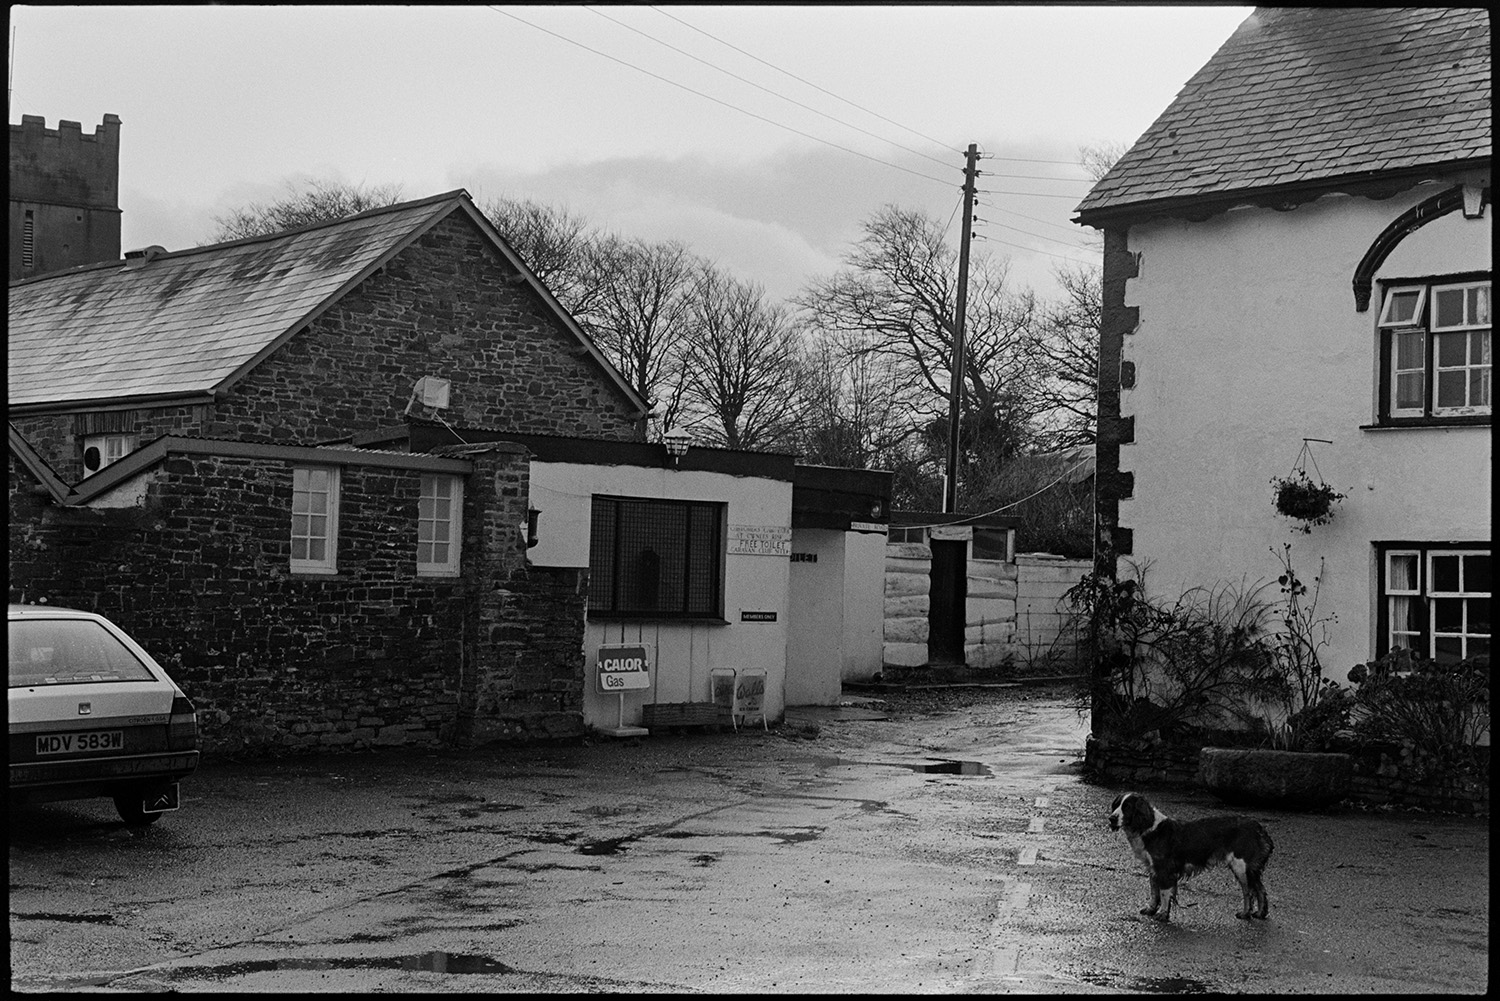 Street scenes, lens test. 
[A dog stood outside the Royal Oak pub in Dolton, opposite a building with a 'Calor Gas' sign outside. Dolton Church can be seen in the background. The image was taken during a lens test by James Ravilious.]